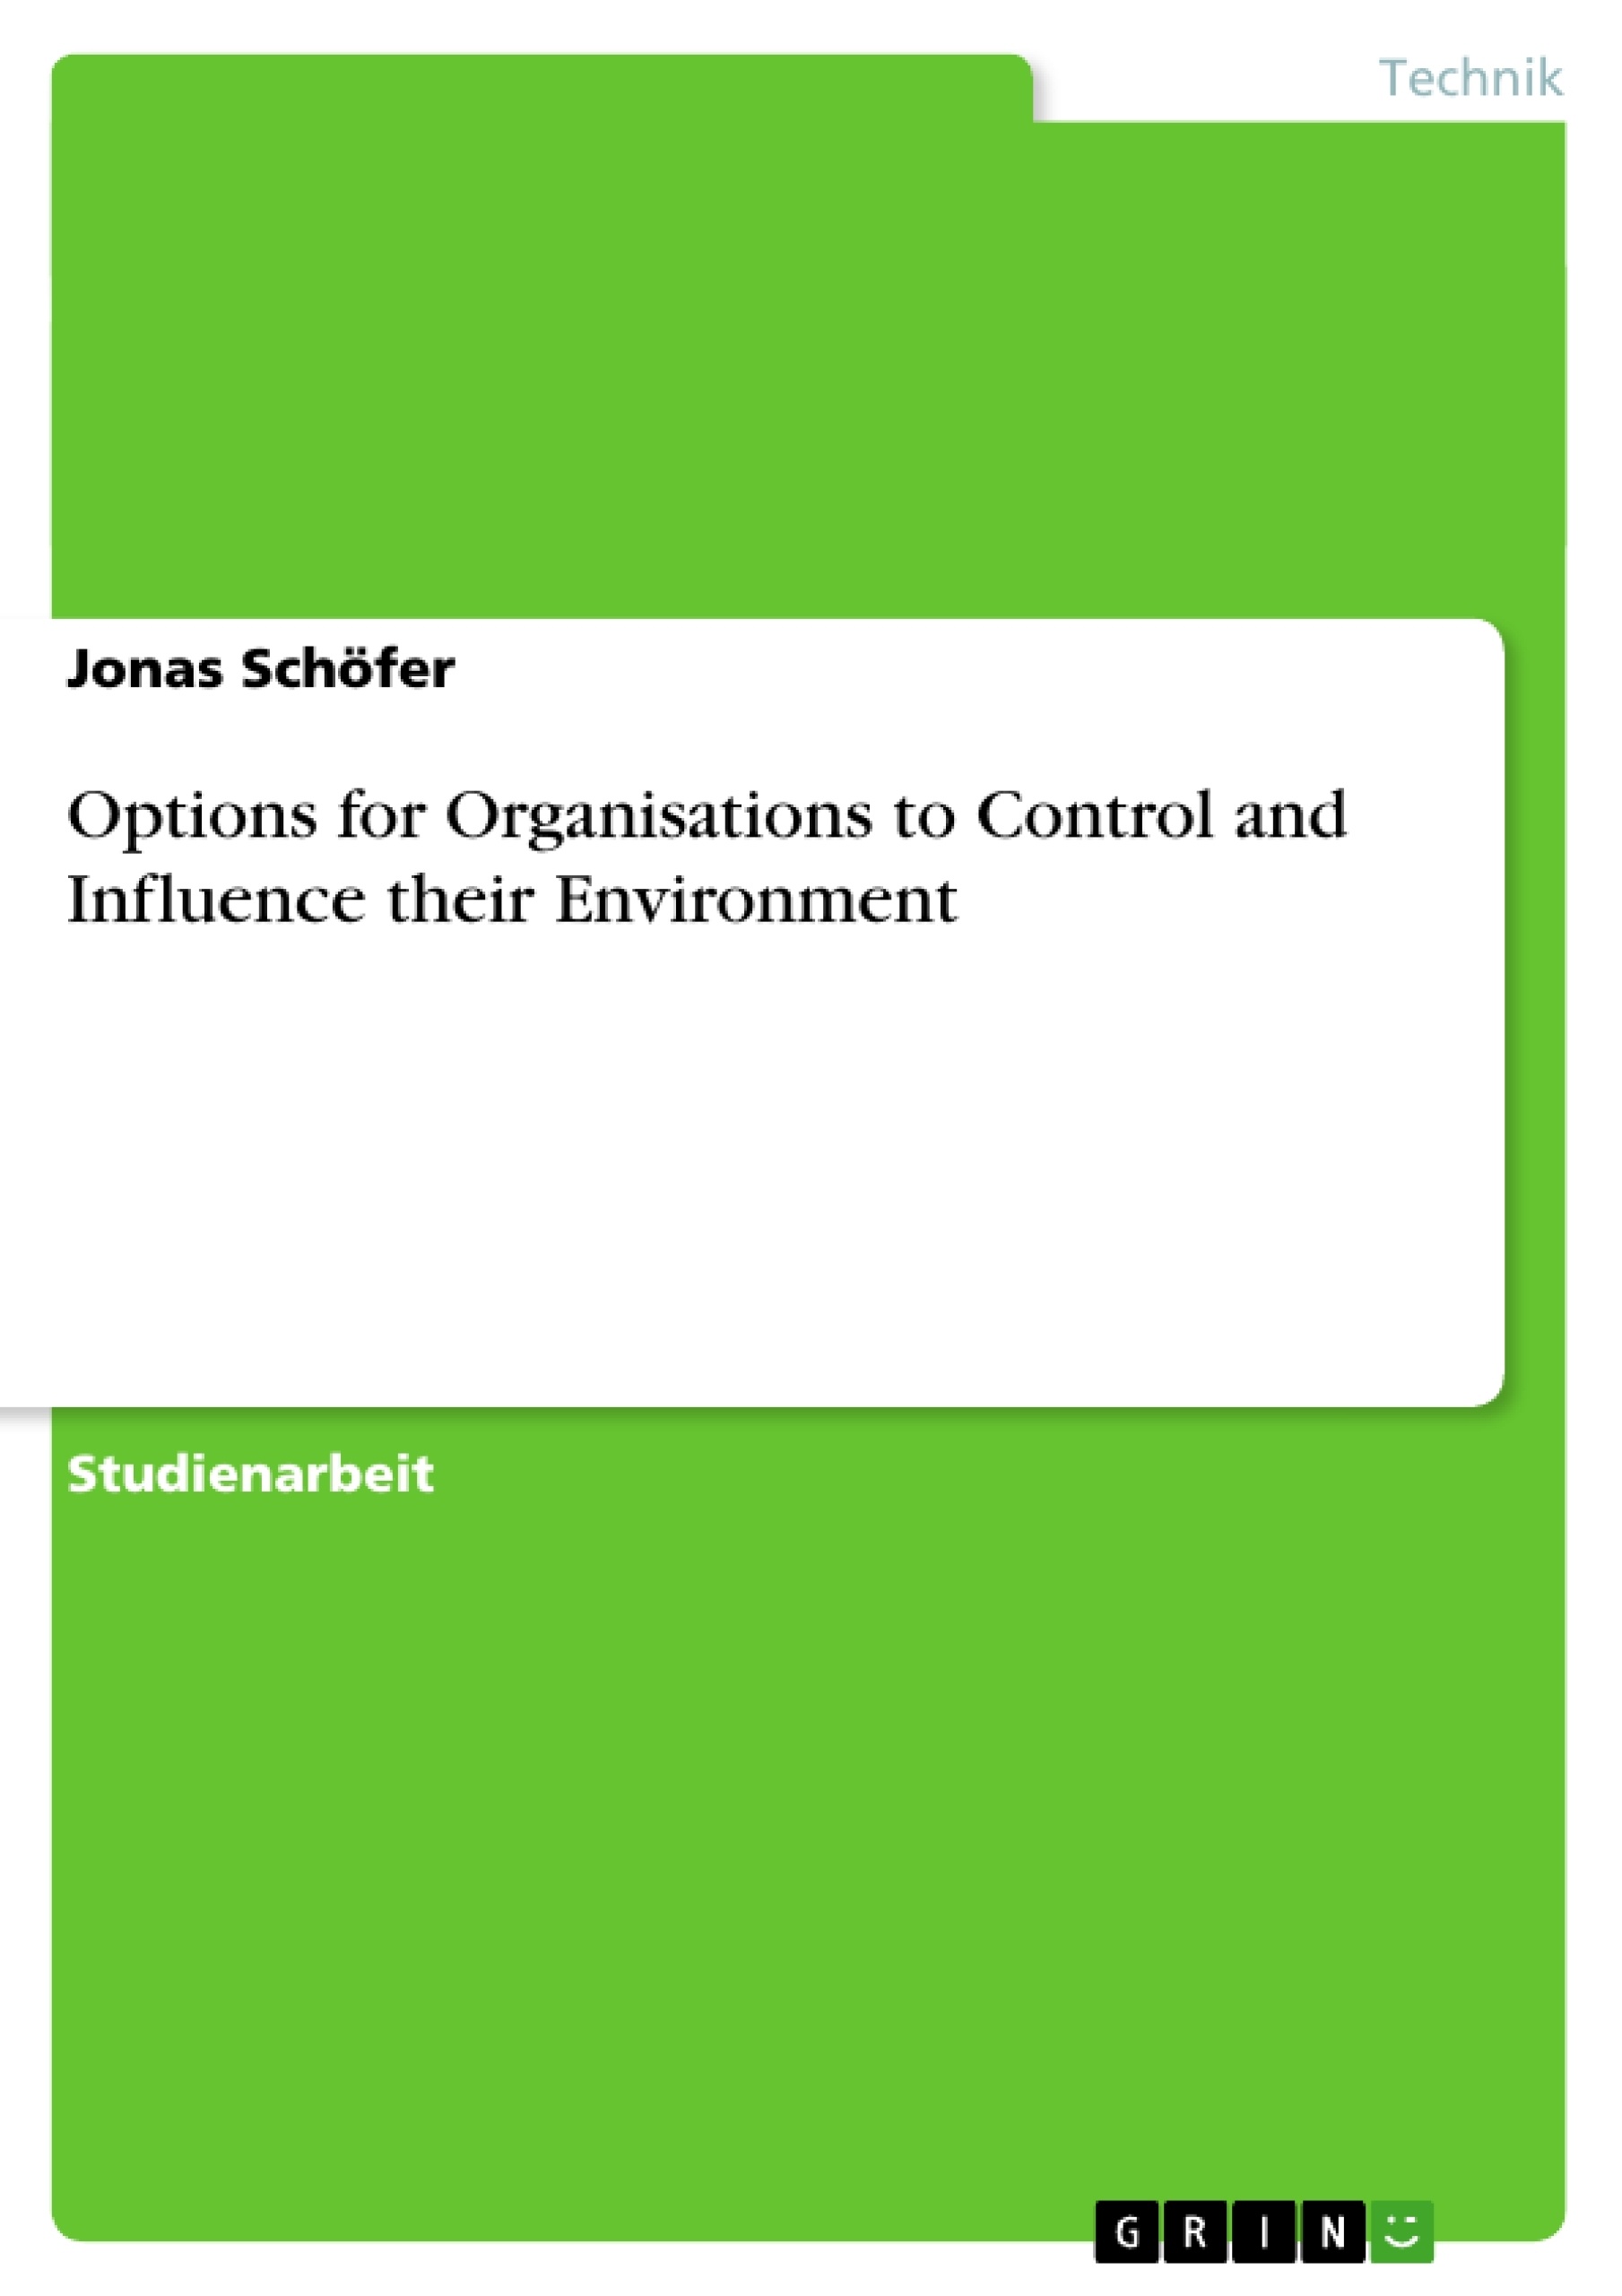 Titel: Options for Organisations to Control and Influence their Environment